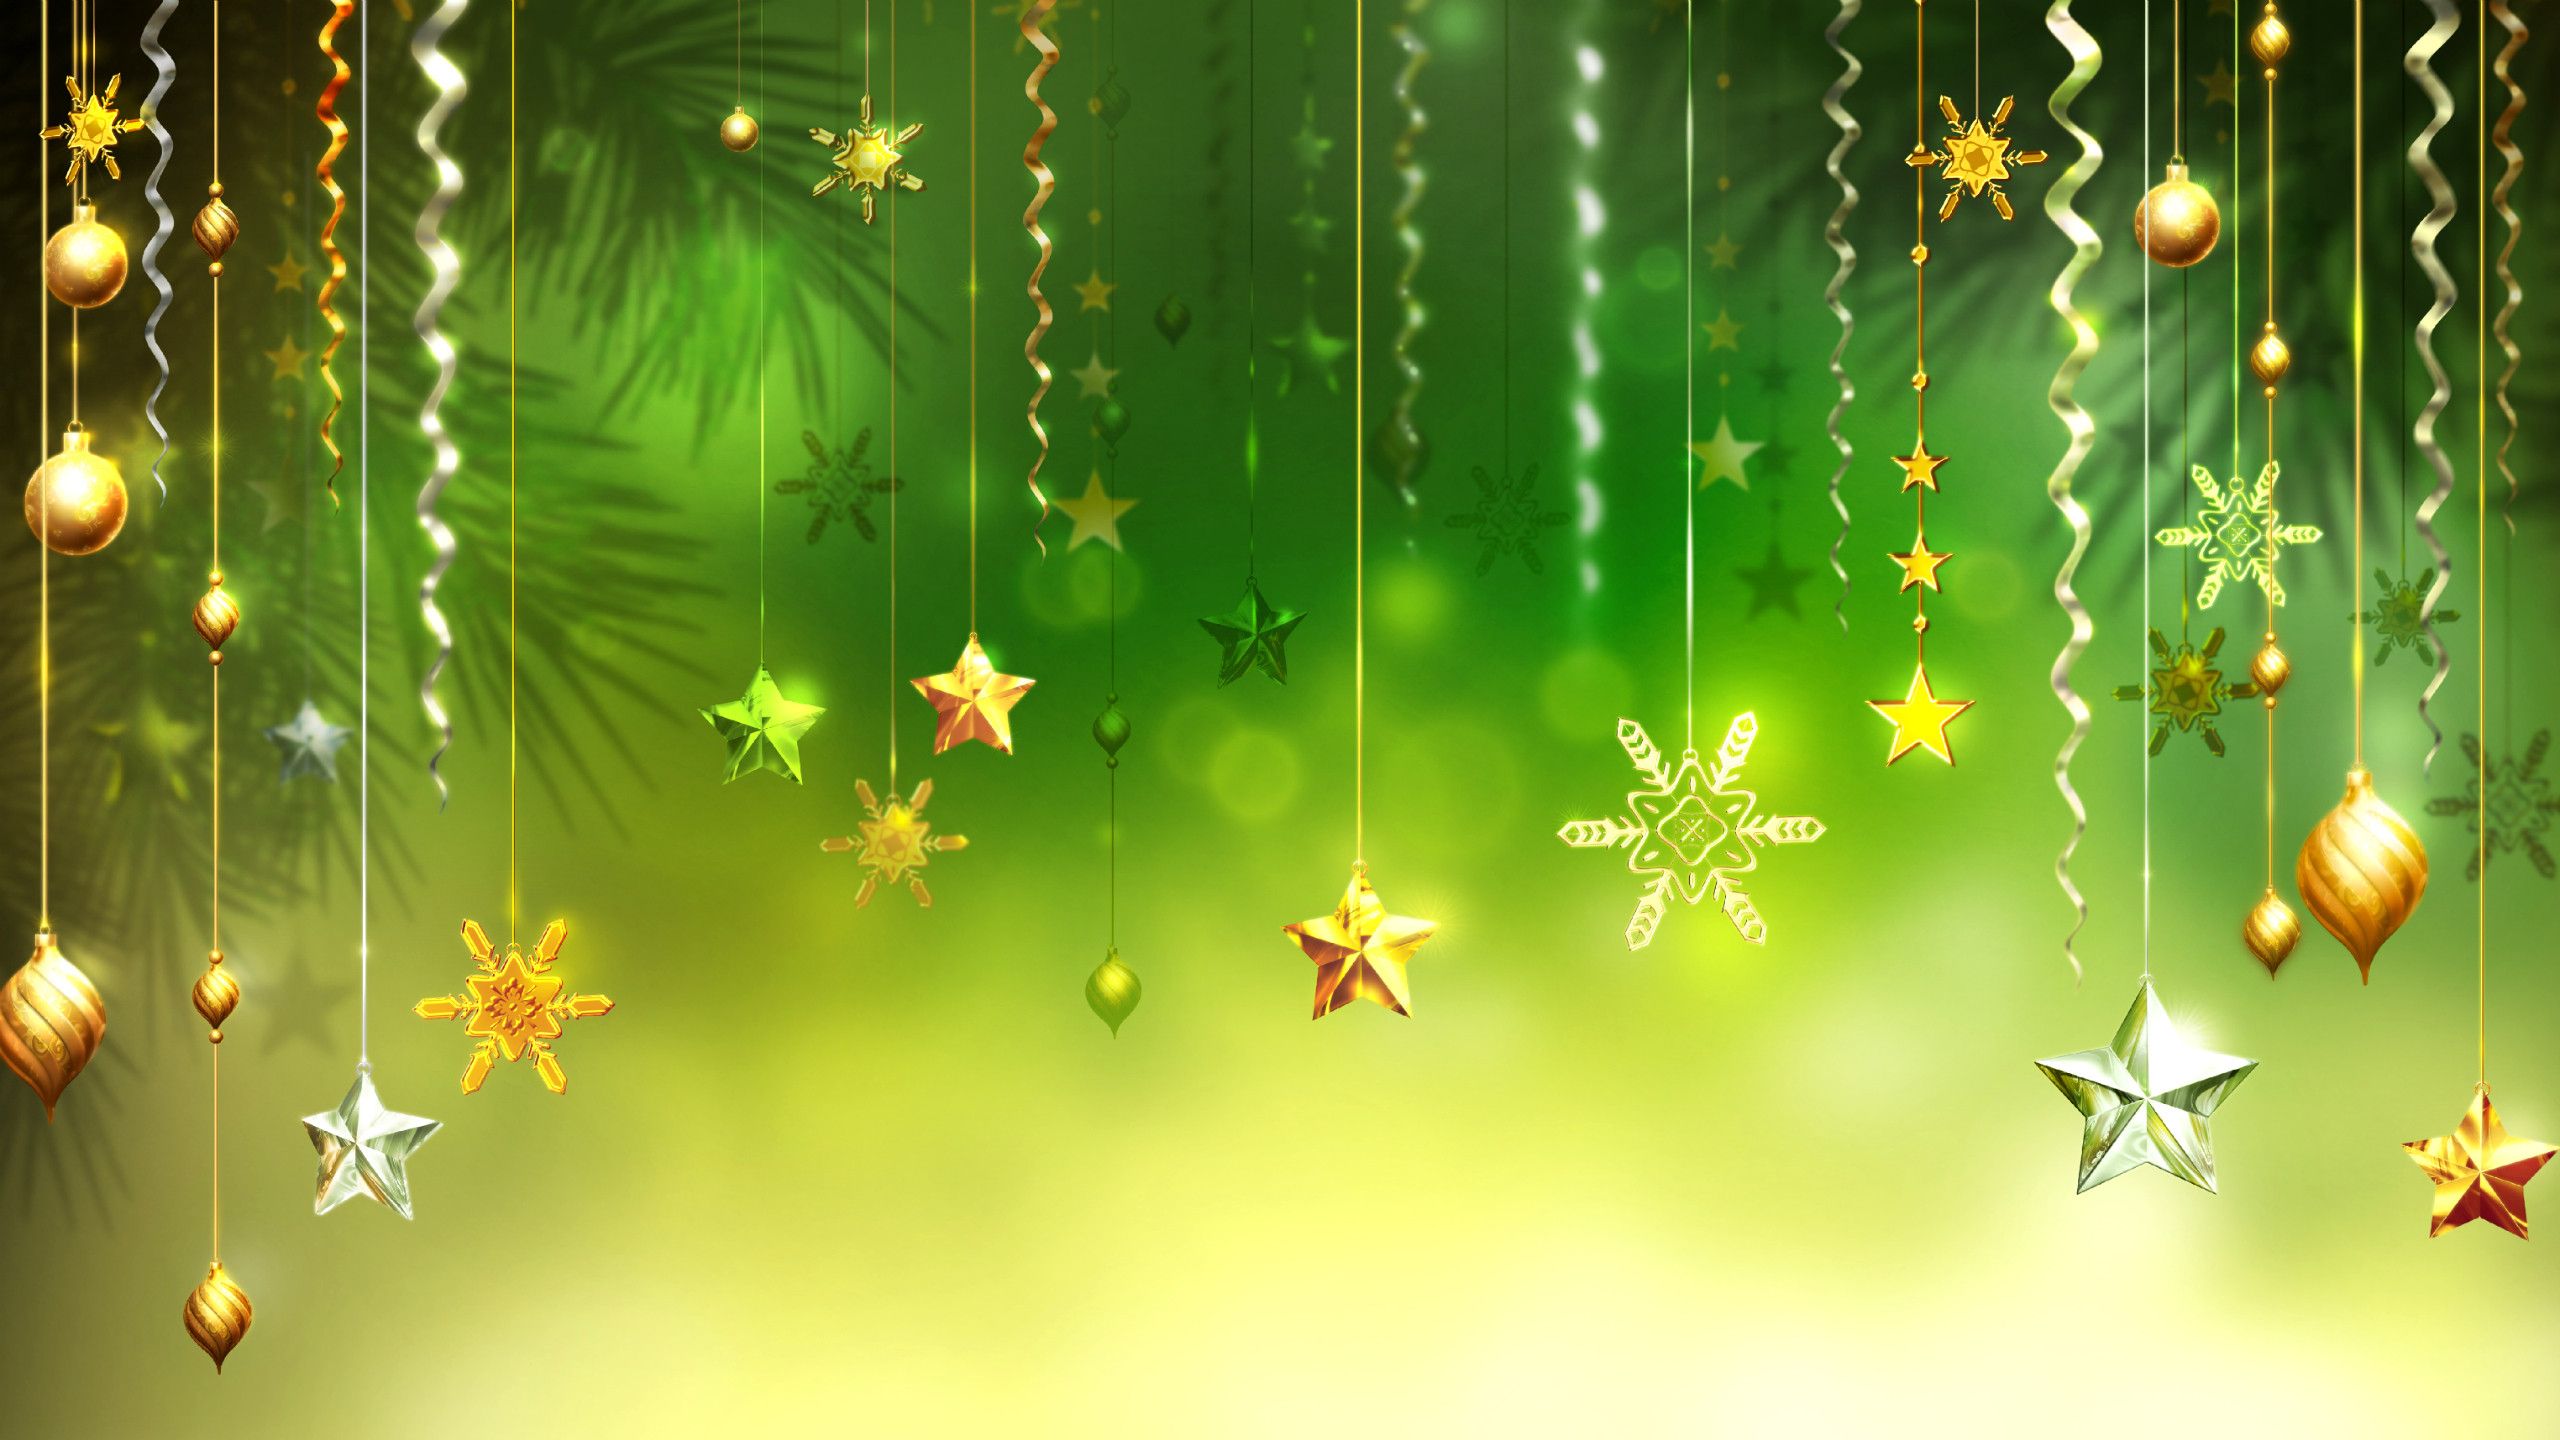 Top 10 Christmas Backgrounds Wallpapers Green,Red,Blue Nice